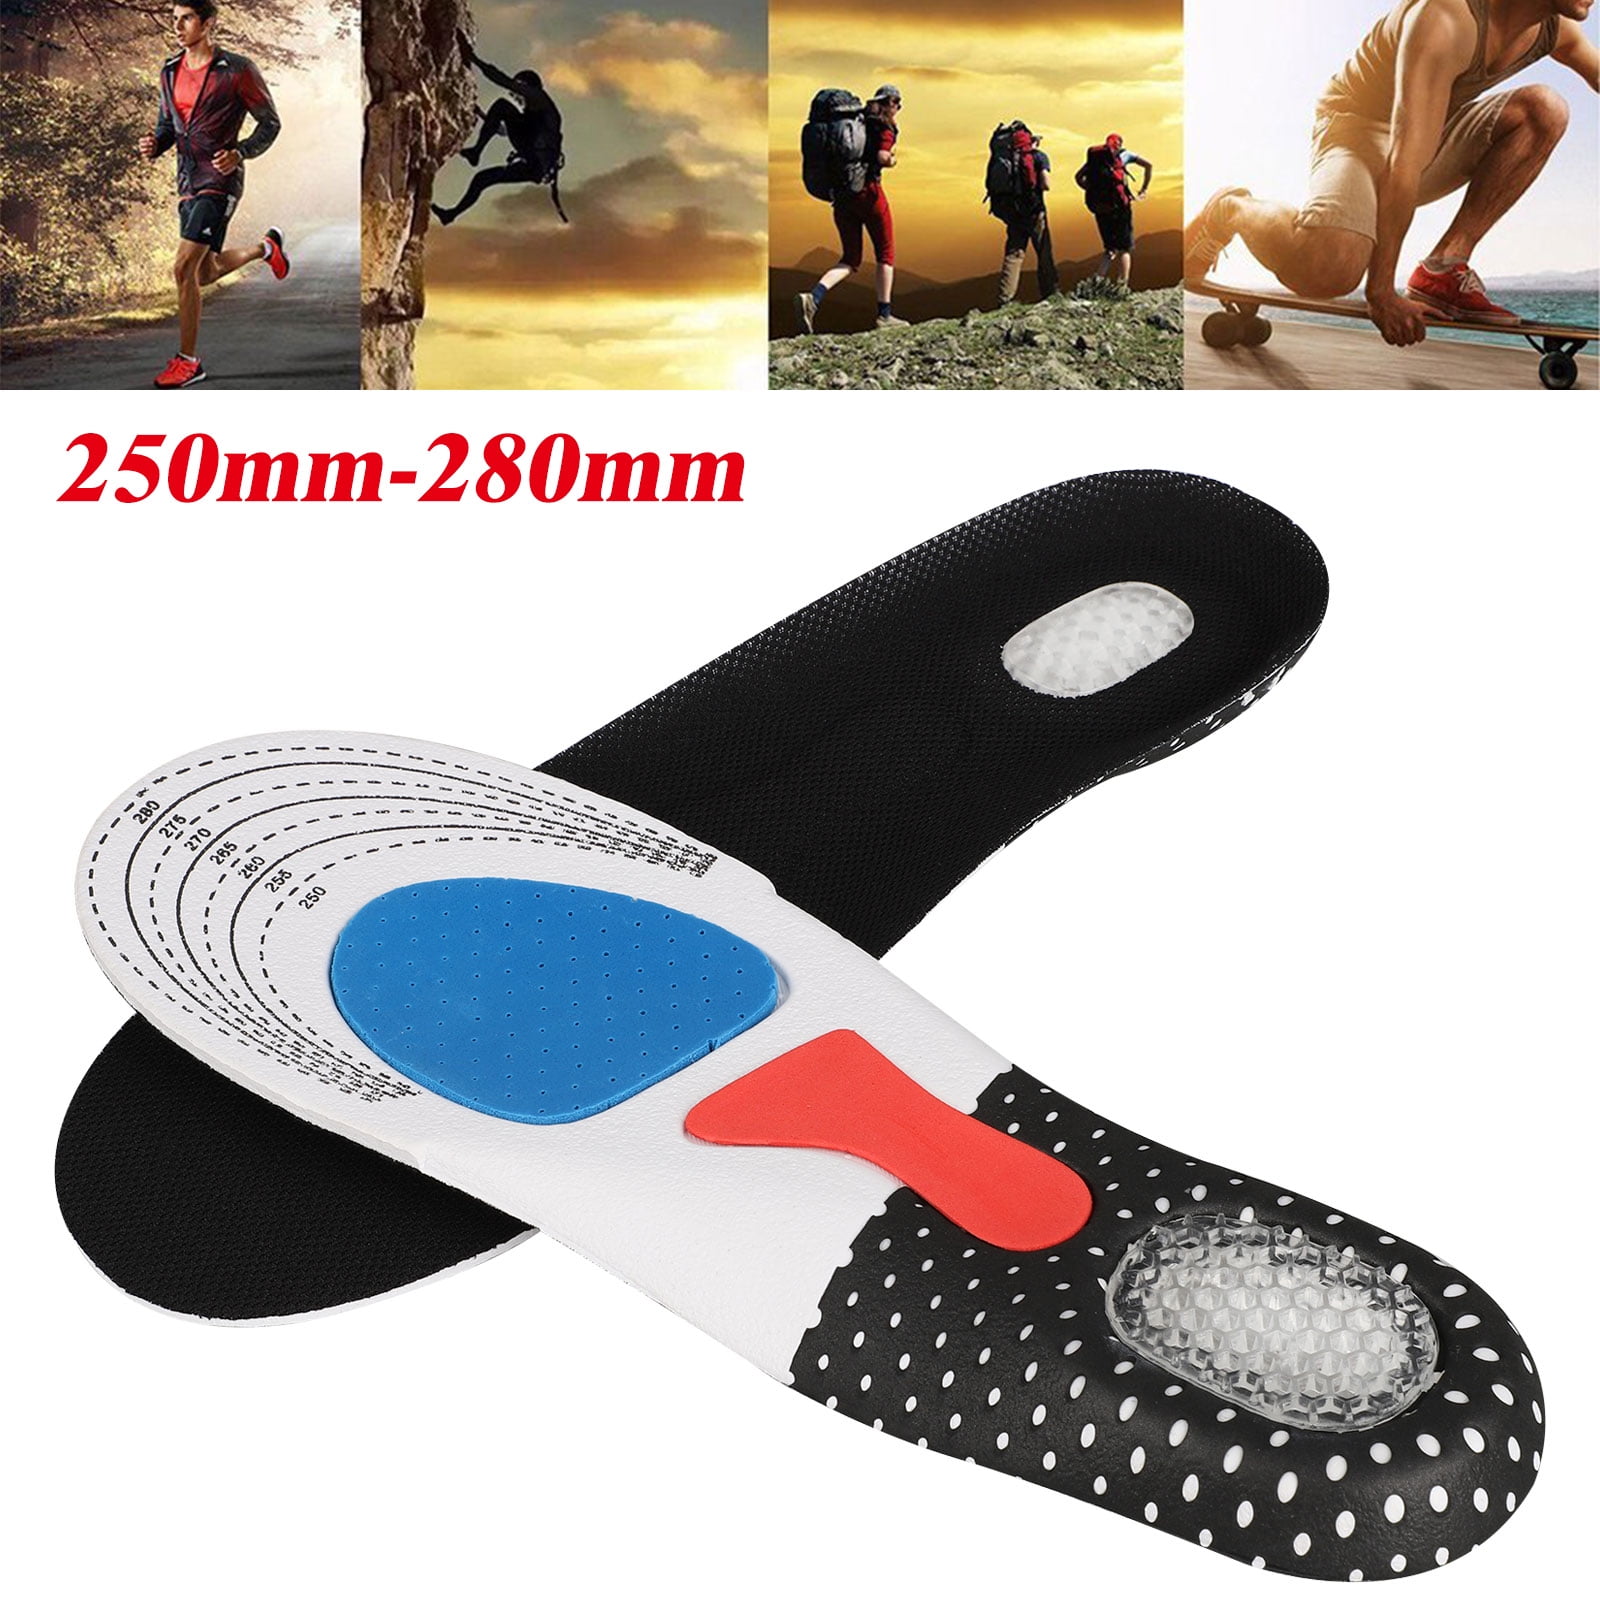 BRAND ORTHOTIC ARCH SUPPORT MASSAGING GEL INSOLES HEEL SUPPORT SPORTS INSOLES 